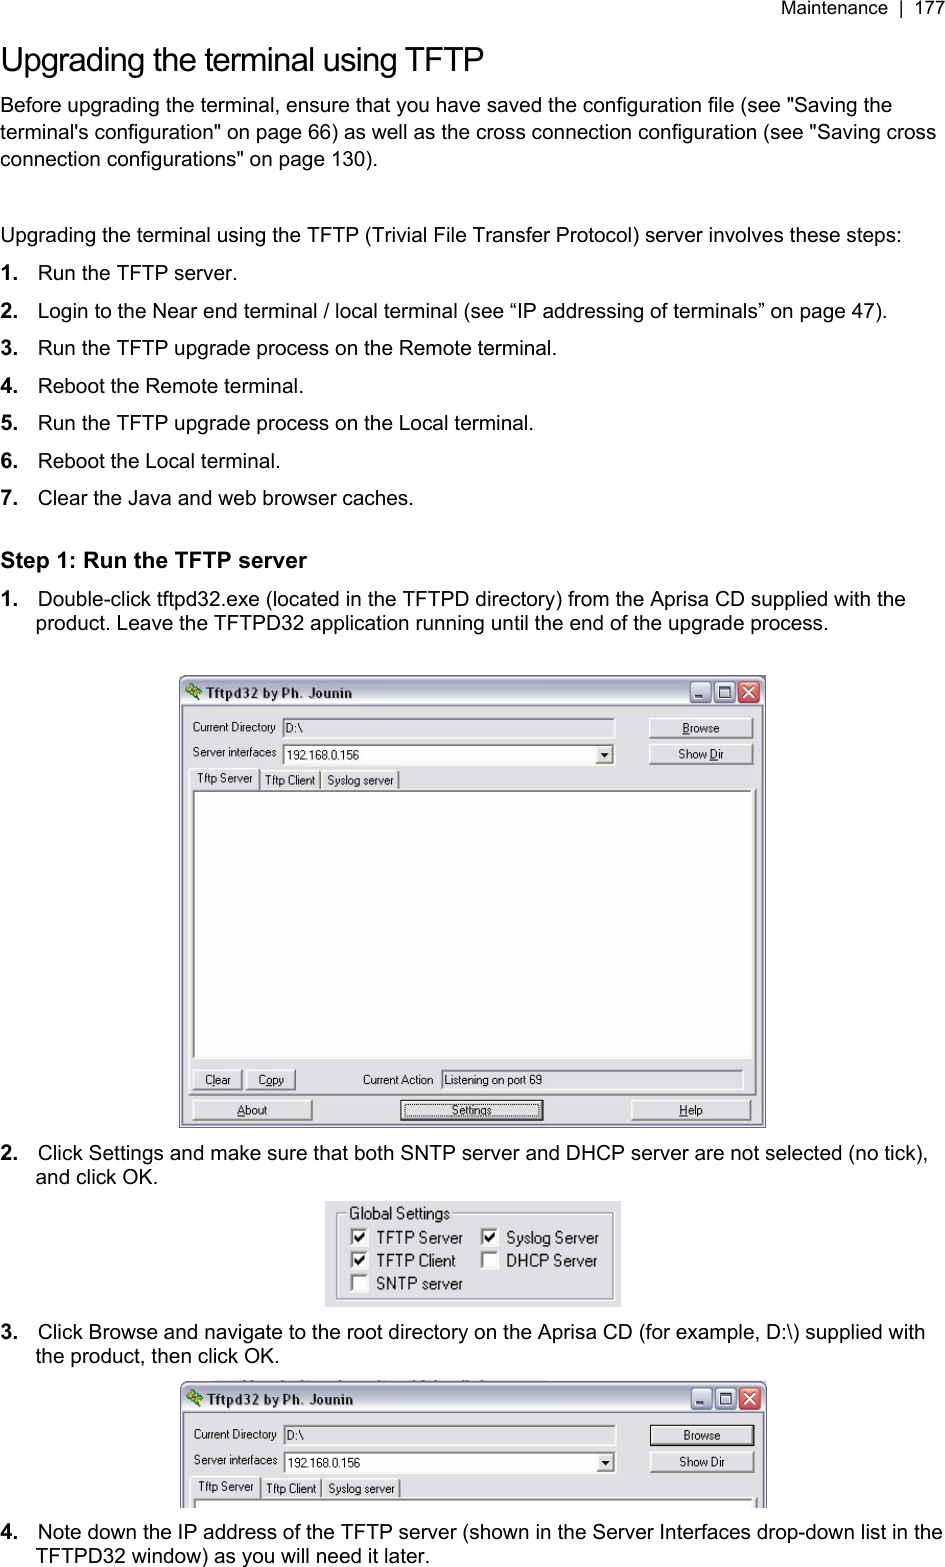 Maintenance  |  177   Upgrading the terminal using TFTP Before upgrading the terminal, ensure that you have saved the configuration file (see &quot;Saving the terminal&apos;s configuration&quot; on page 66) as well as the cross connection configuration (see &quot;Saving cross connection configurations&quot; on page 130).  Upgrading the terminal using the TFTP (Trivial File Transfer Protocol) server involves these steps: 1.  Run the TFTP server. 2.  Login to the Near end terminal / local terminal (see “IP addressing of terminals” on page 47). 3.  Run the TFTP upgrade process on the Remote terminal. 4.  Reboot the Remote terminal. 5.  Run the TFTP upgrade process on the Local terminal. 6.  Reboot the Local terminal. 7.  Clear the Java and web browser caches.  Step 1: Run the TFTP server 1.  Double-click tftpd32.exe (located in the TFTPD directory) from the Aprisa CD supplied with the product. Leave the TFTPD32 application running until the end of the upgrade process.   2.  Click Settings and make sure that both SNTP server and DHCP server are not selected (no tick), and click OK.  3.  Click Browse and navigate to the root directory on the Aprisa CD (for example, D:\) supplied with the product, then click OK.  4.  Note down the IP address of the TFTP server (shown in the Server Interfaces drop-down list in the TFTPD32 window) as you will need it later. 